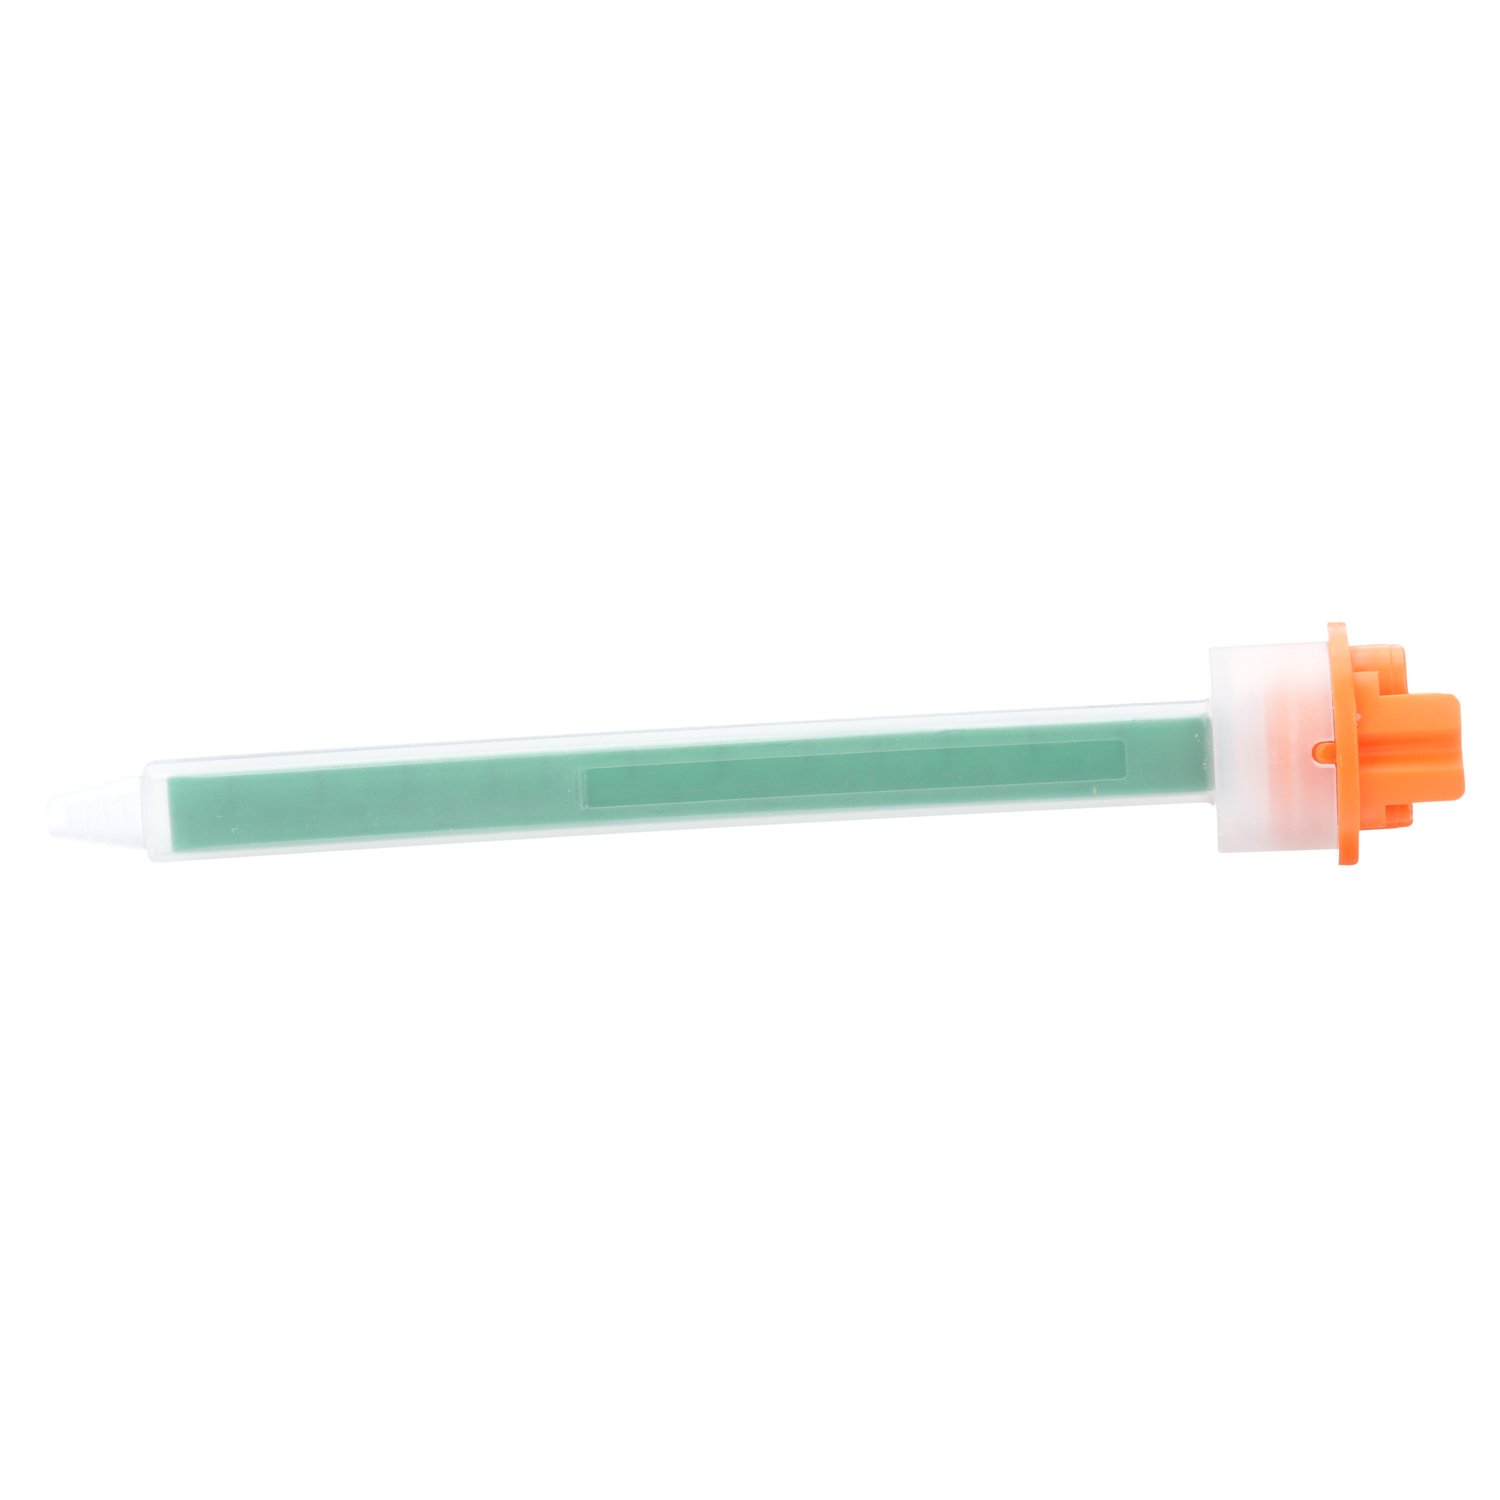 7100066351 - 3M Scotch-Weld EPX Mixing Nozzle, Square Green, 490 mL, Low Waste, 36
Each/Case